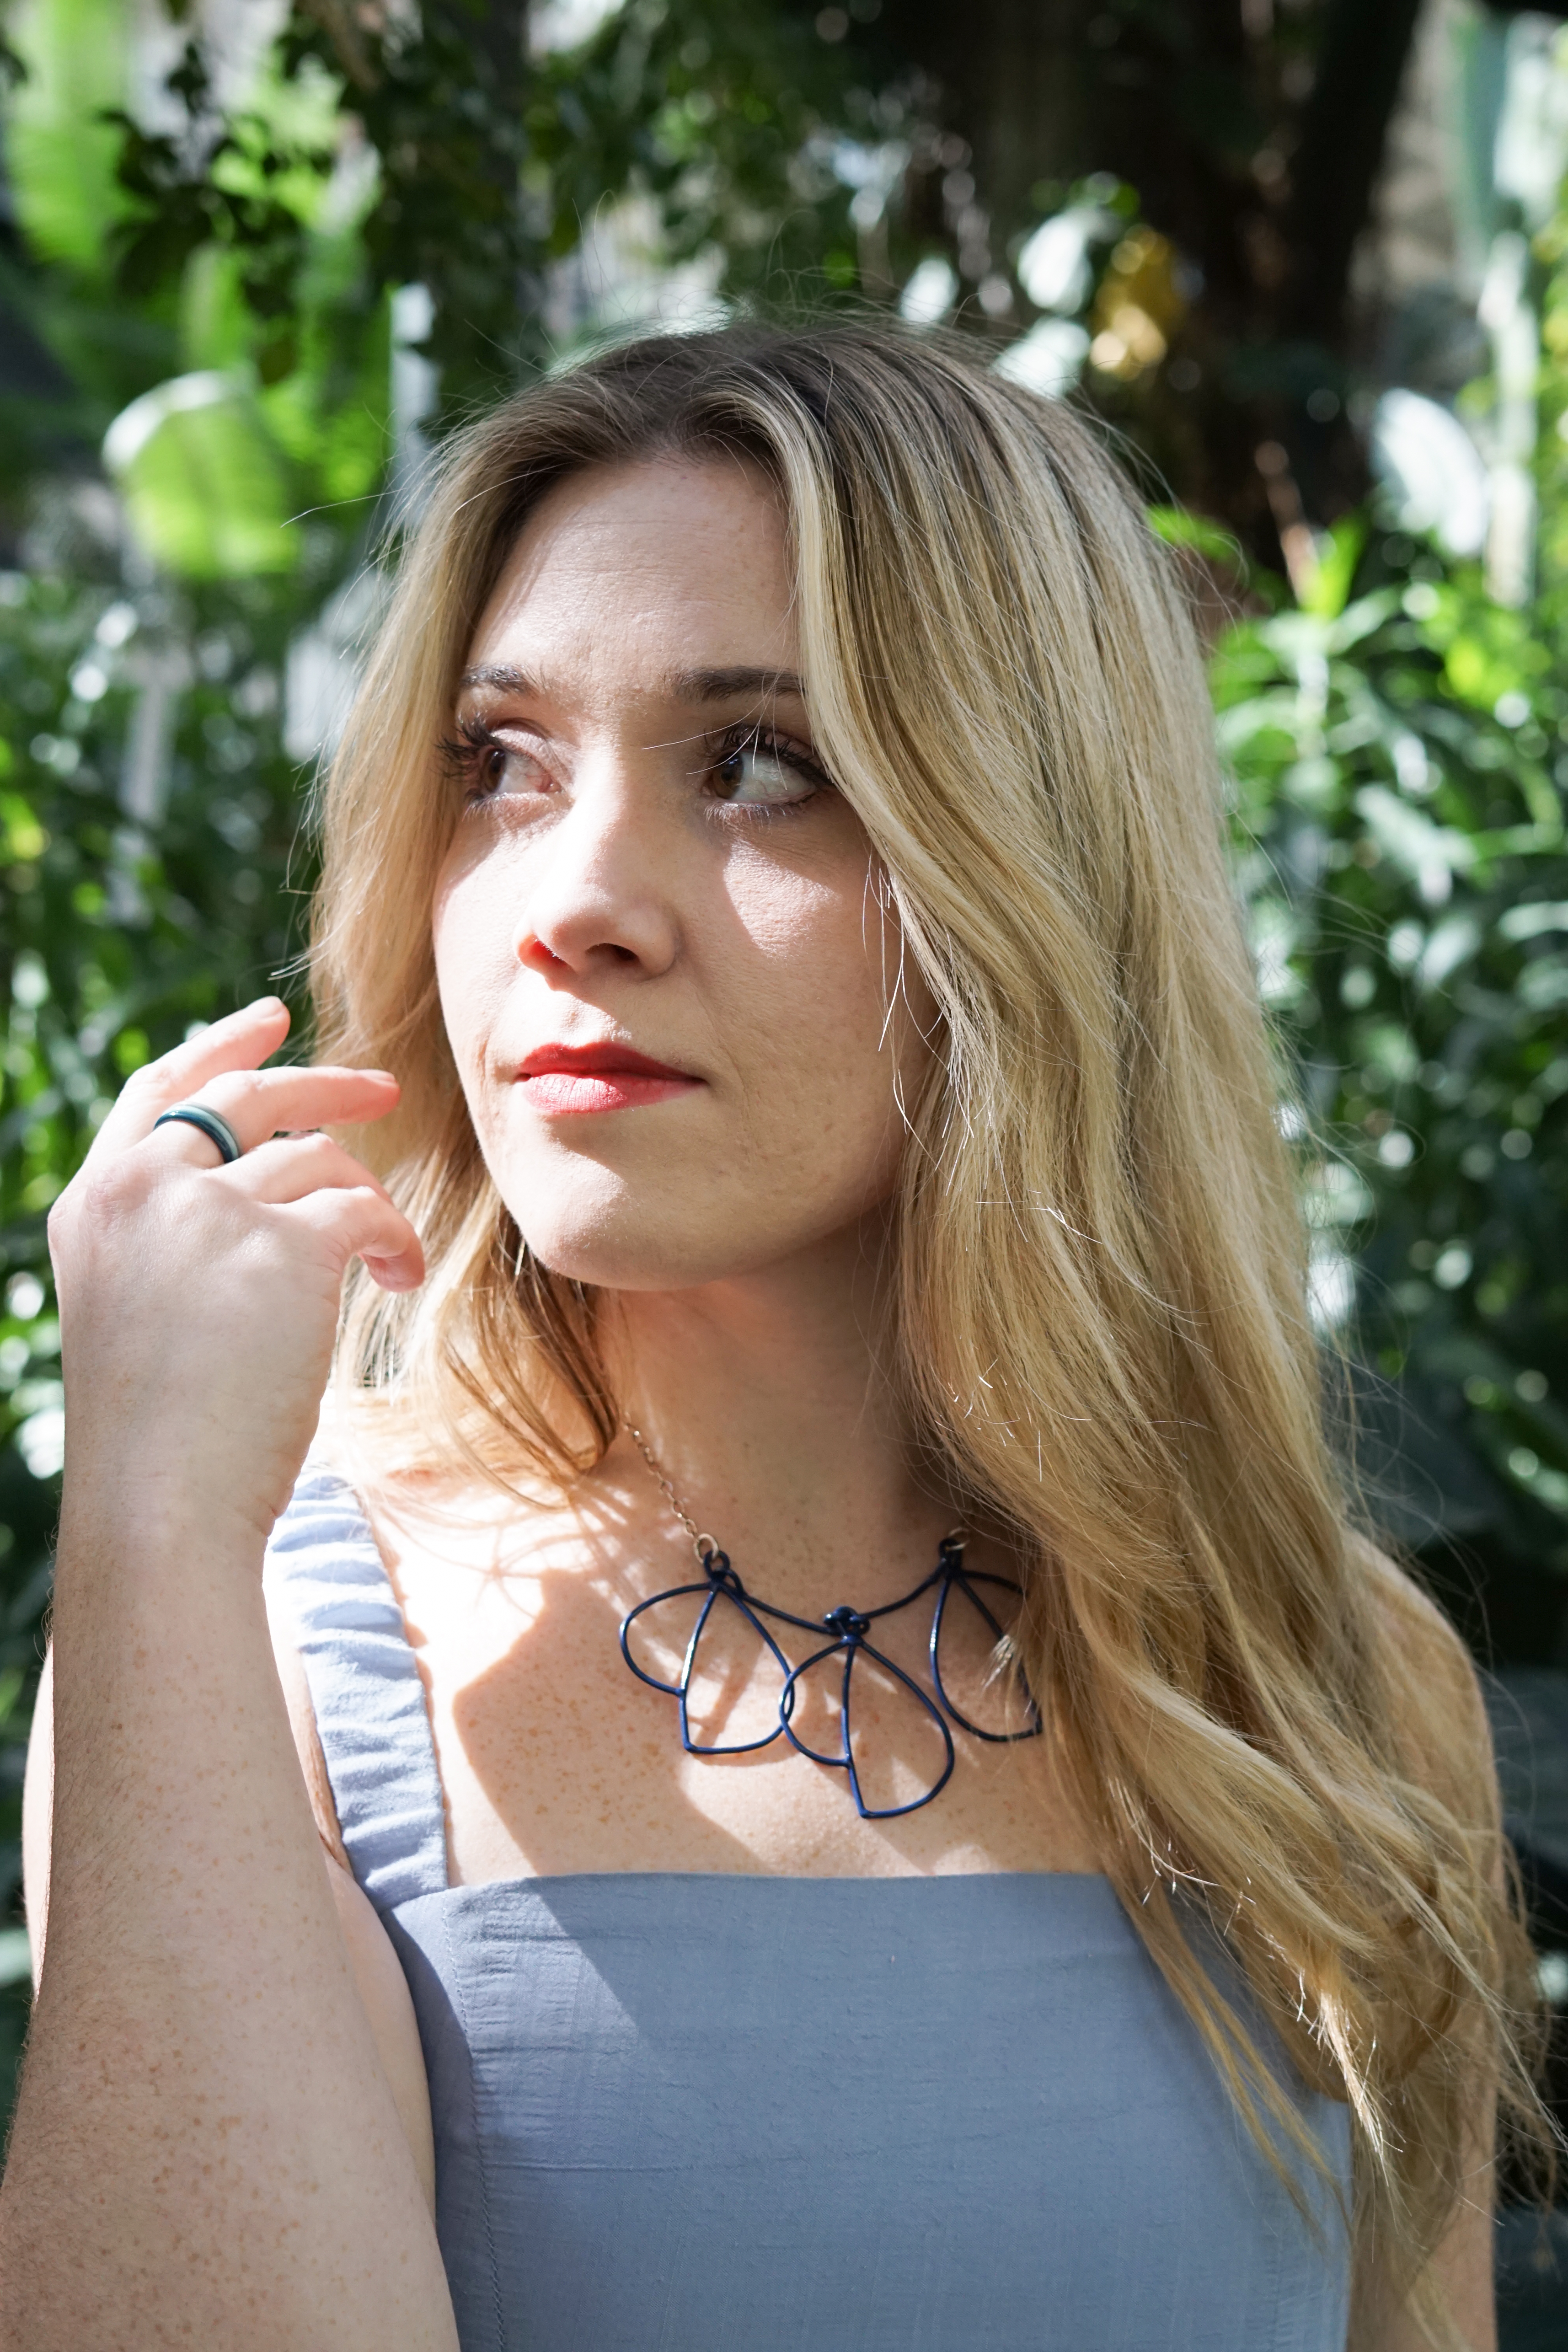 Trista in garden with blue dress and trivolo statement necklace